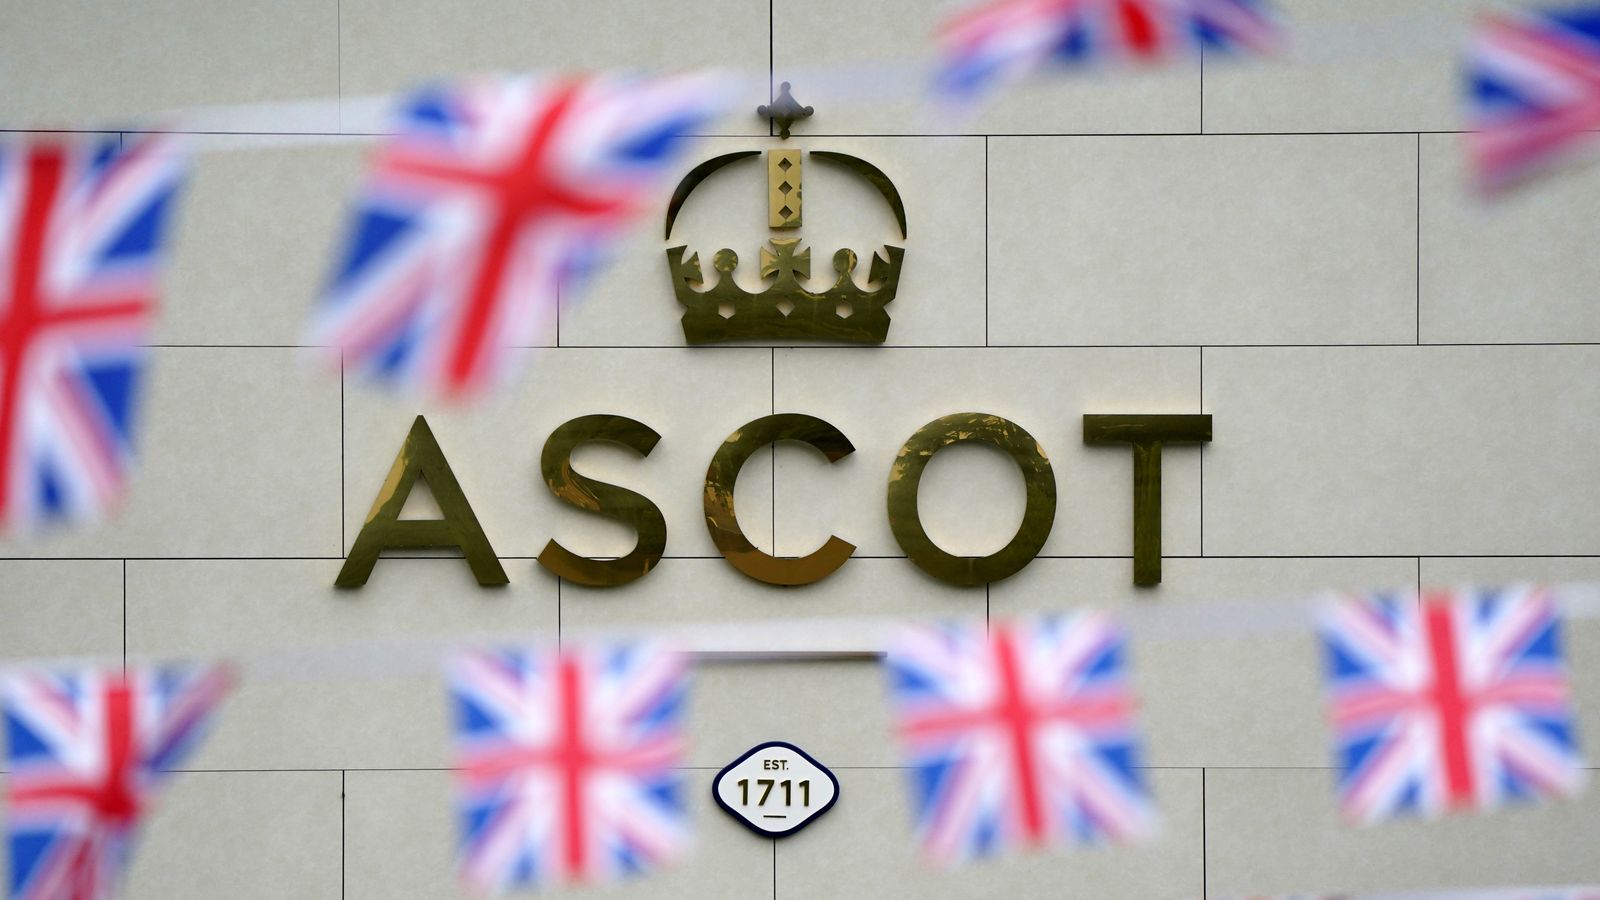 Royal Ascot day three tips: 33/1 is no joke on The Riddler, says Jones Knows